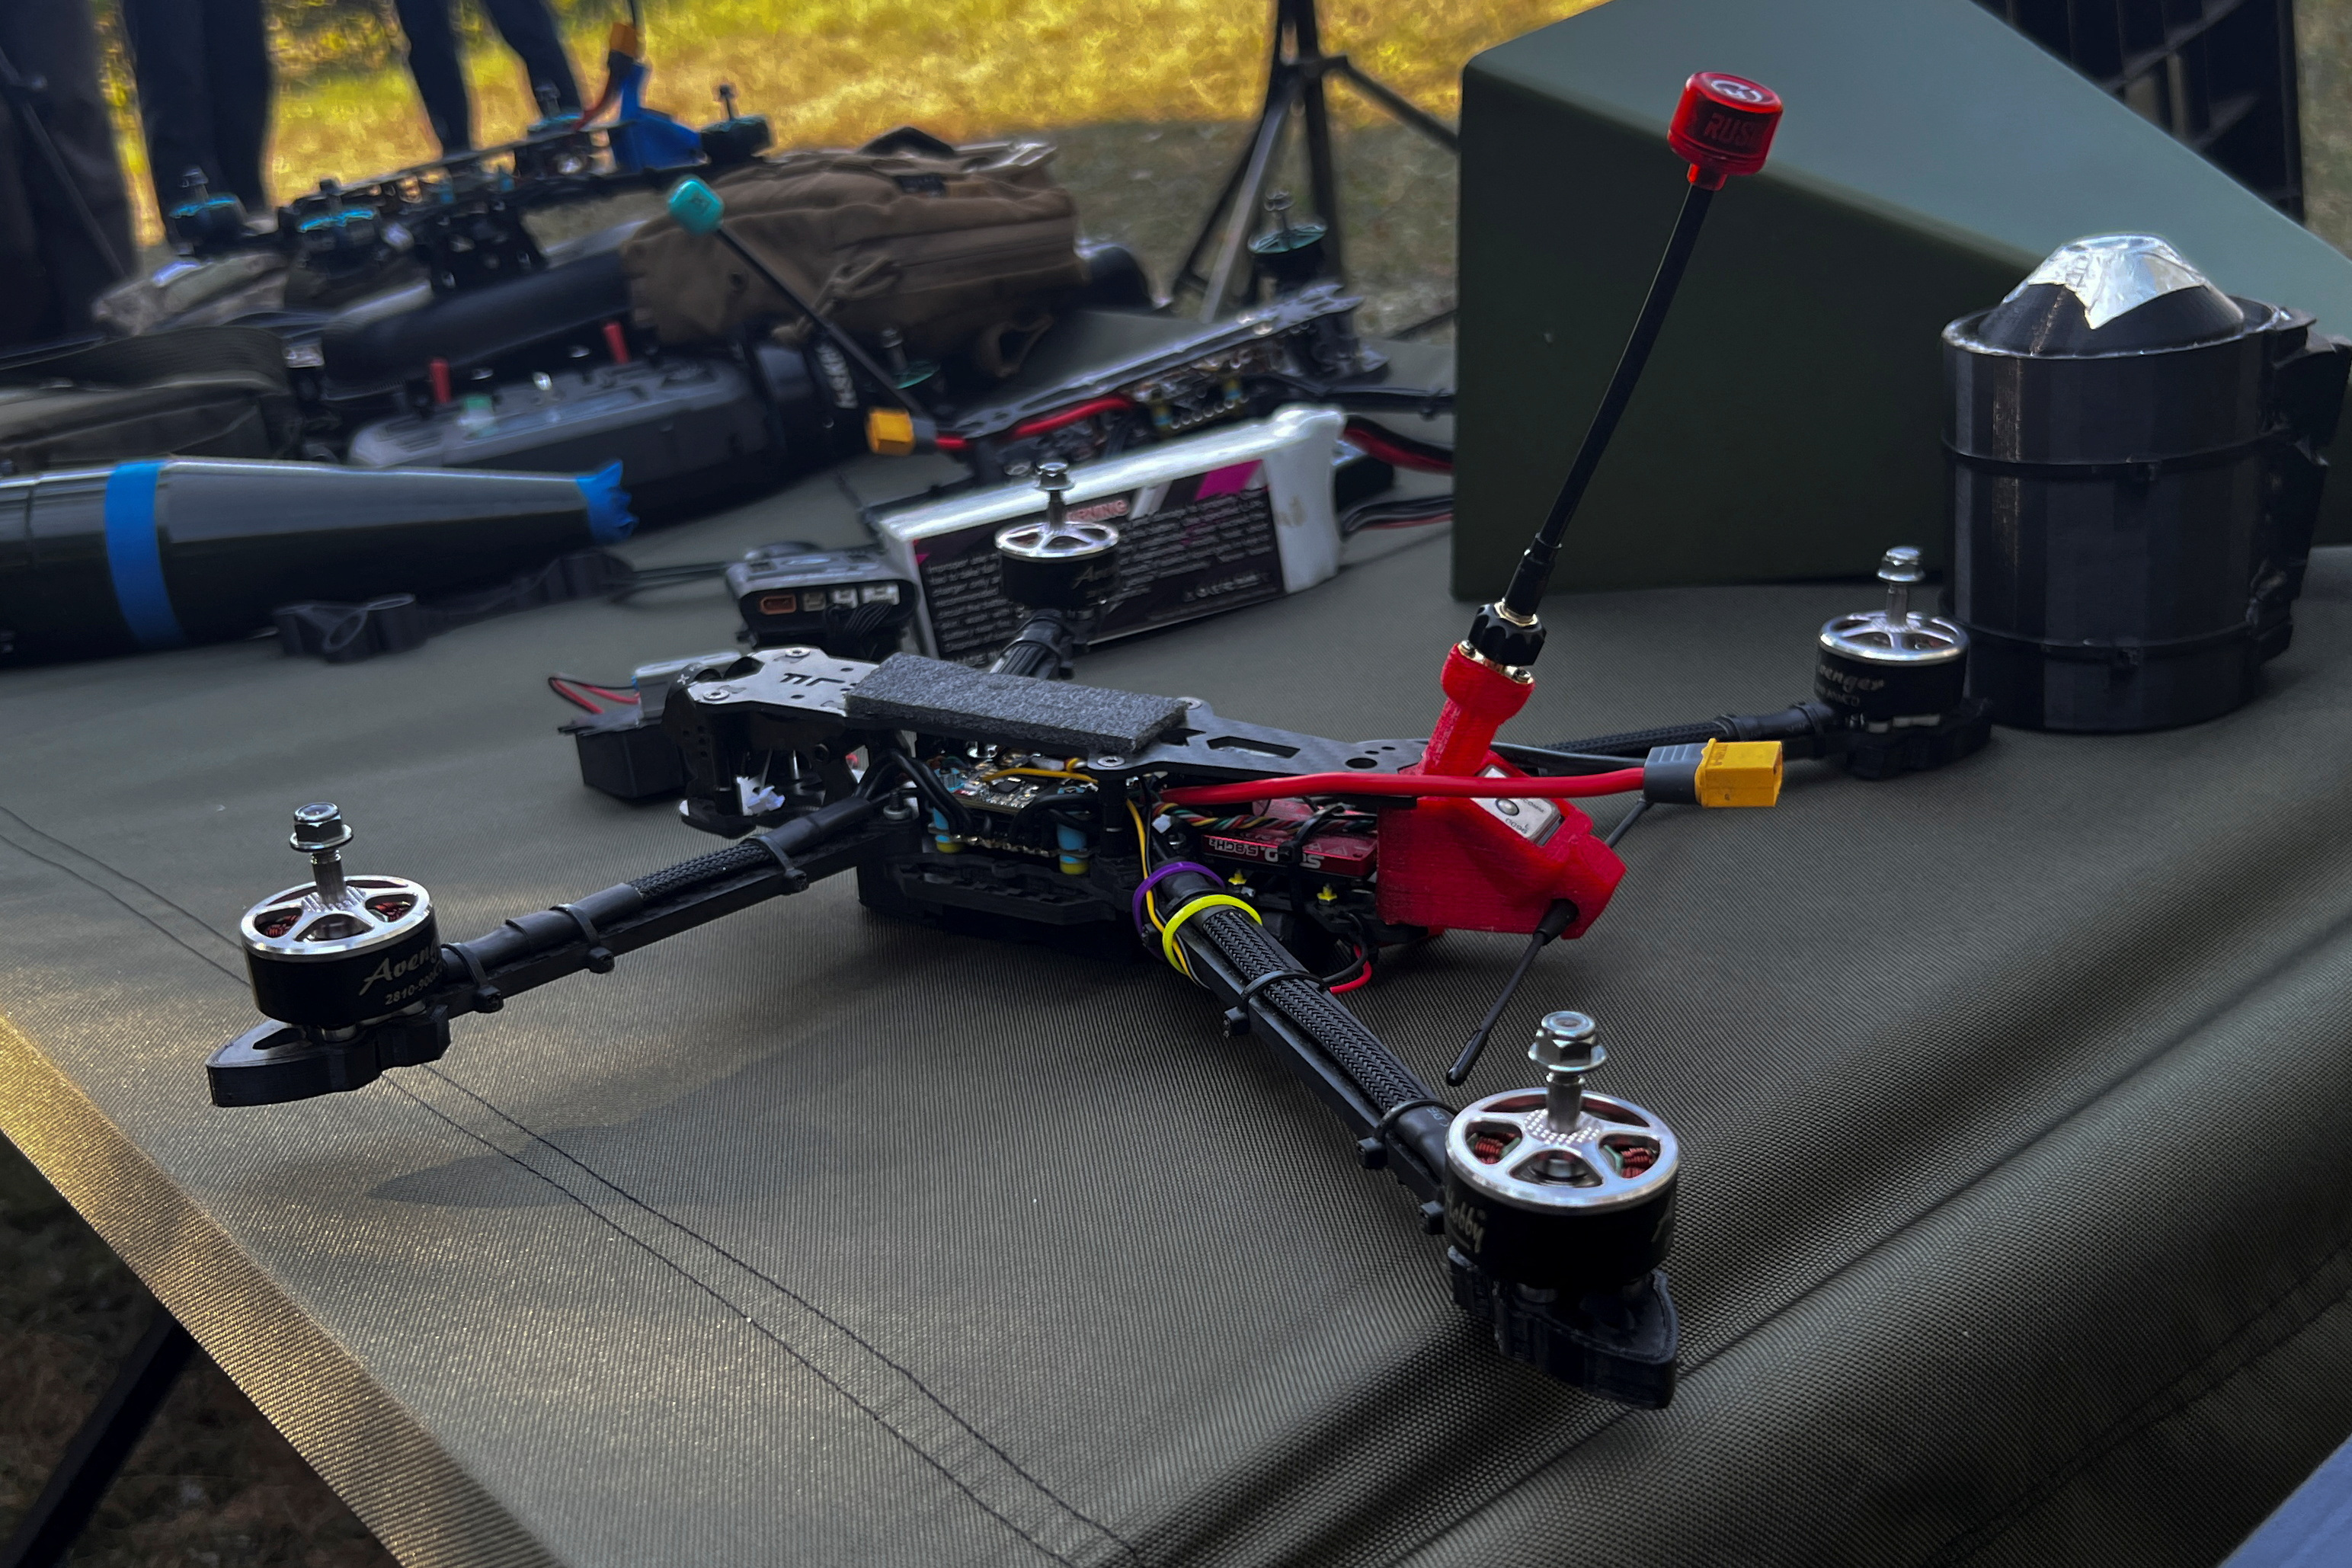 What Is an FPV Drone?